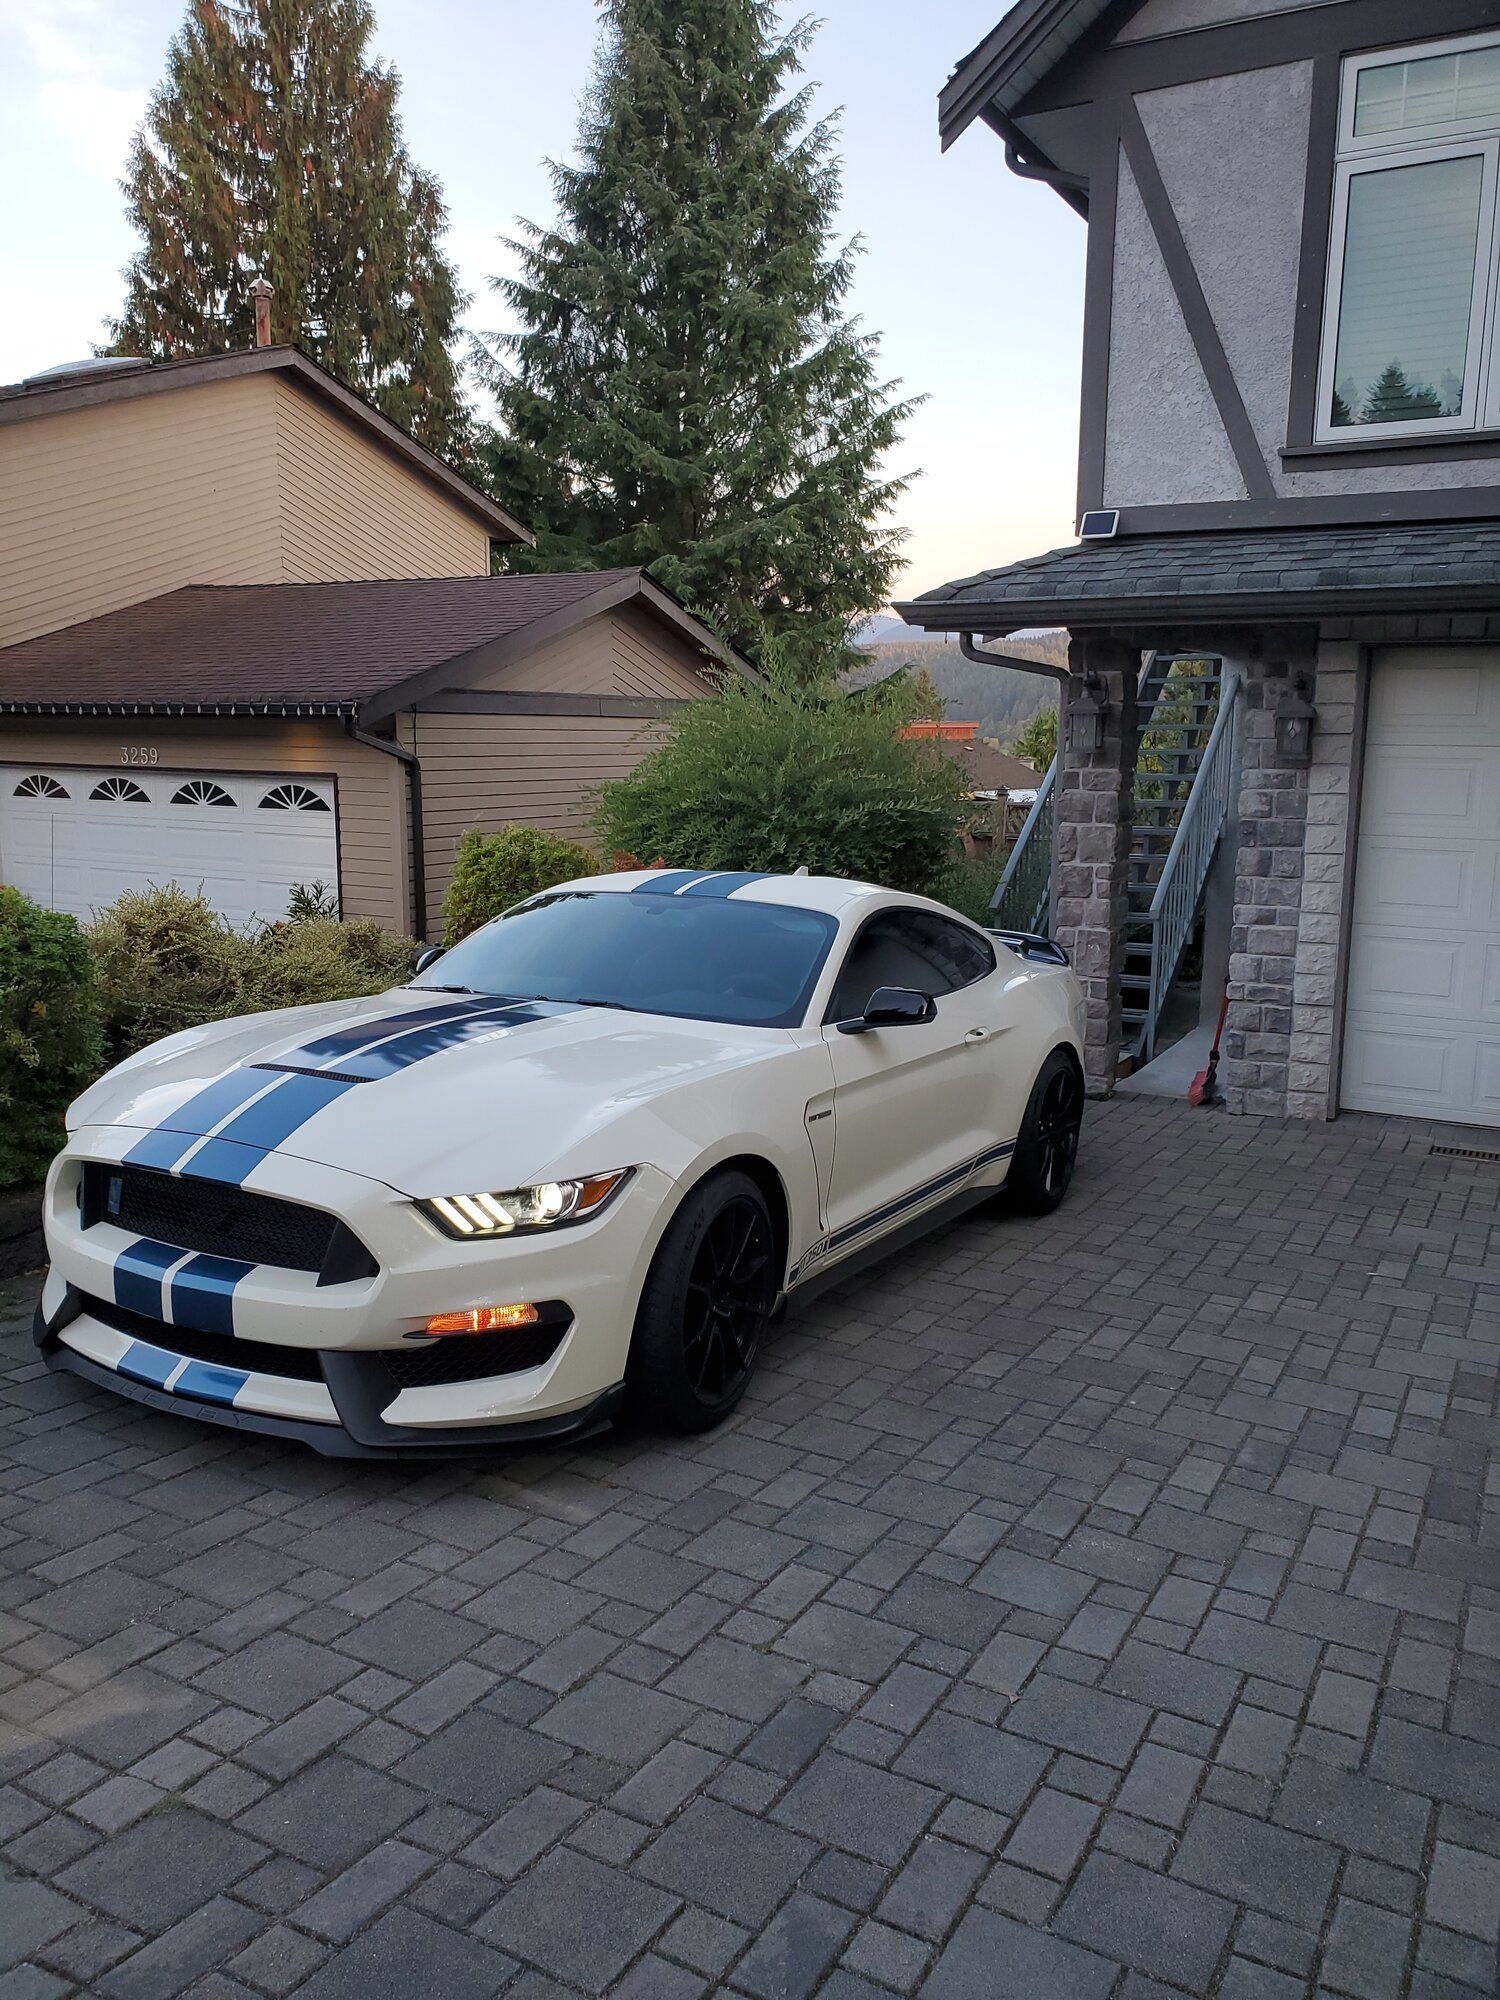 2020 Mustang
GT350  (The best and worst decision of my life)